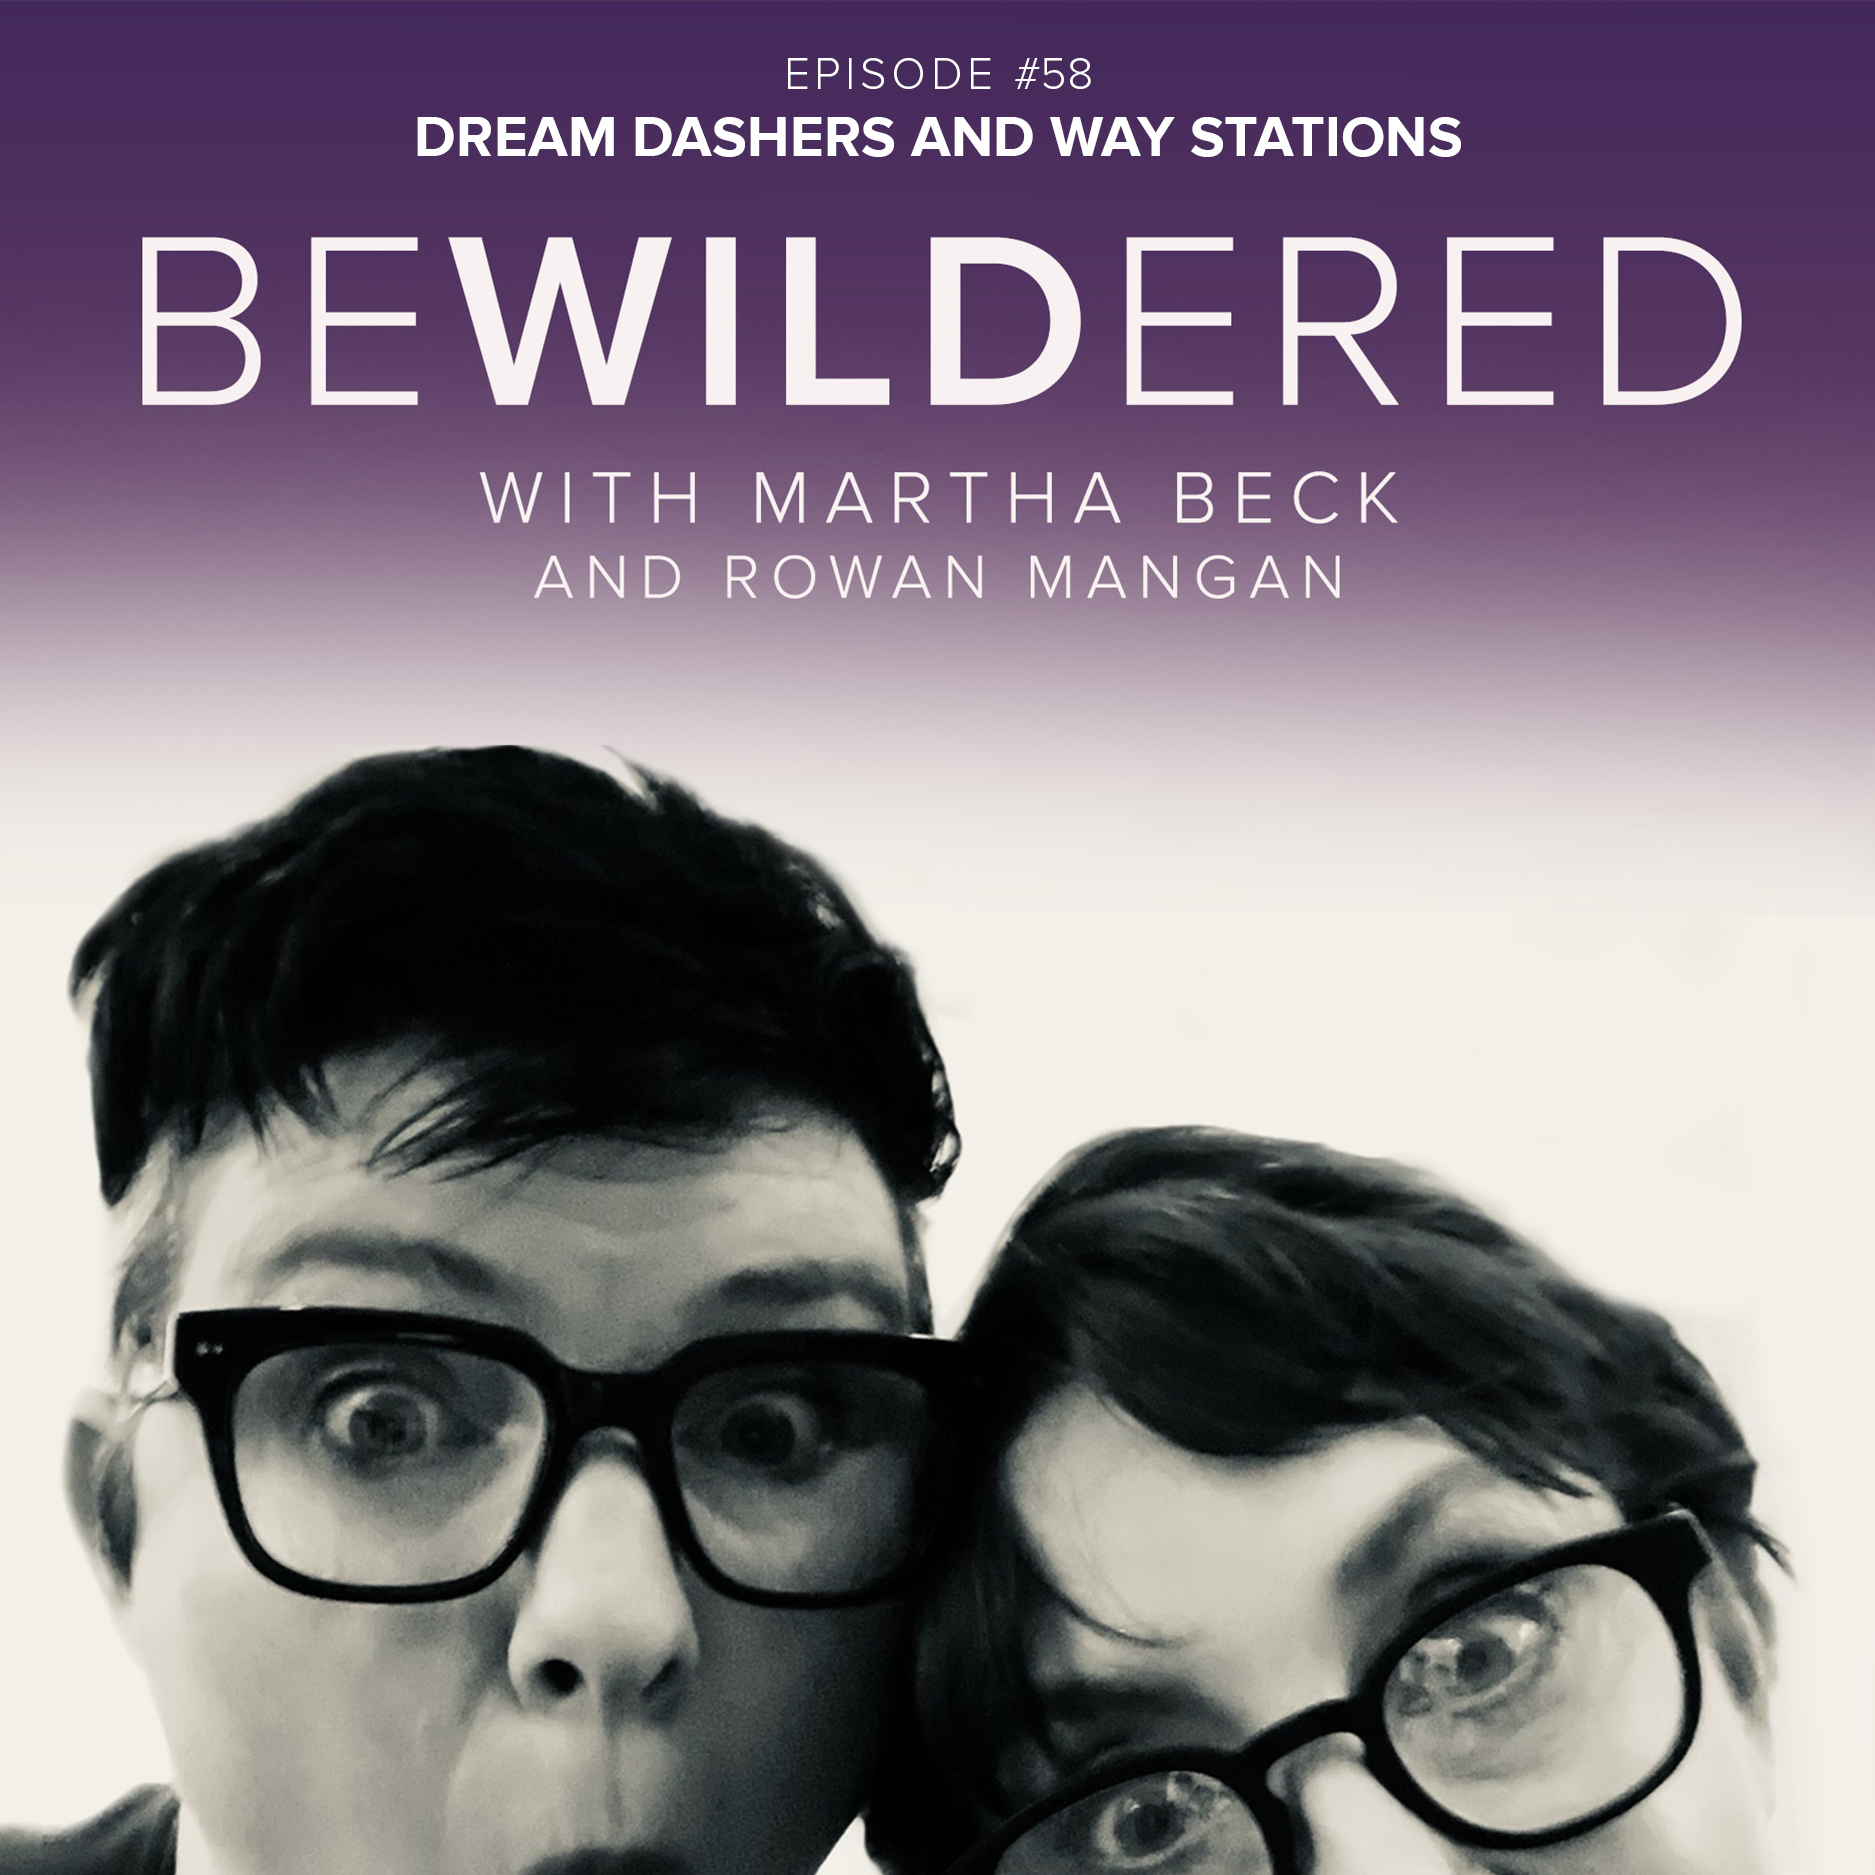 Image for Episode #58 Dream Dashers and Way Stations for the Bewildered Podcast with Martha Beck and Rowan Mangan